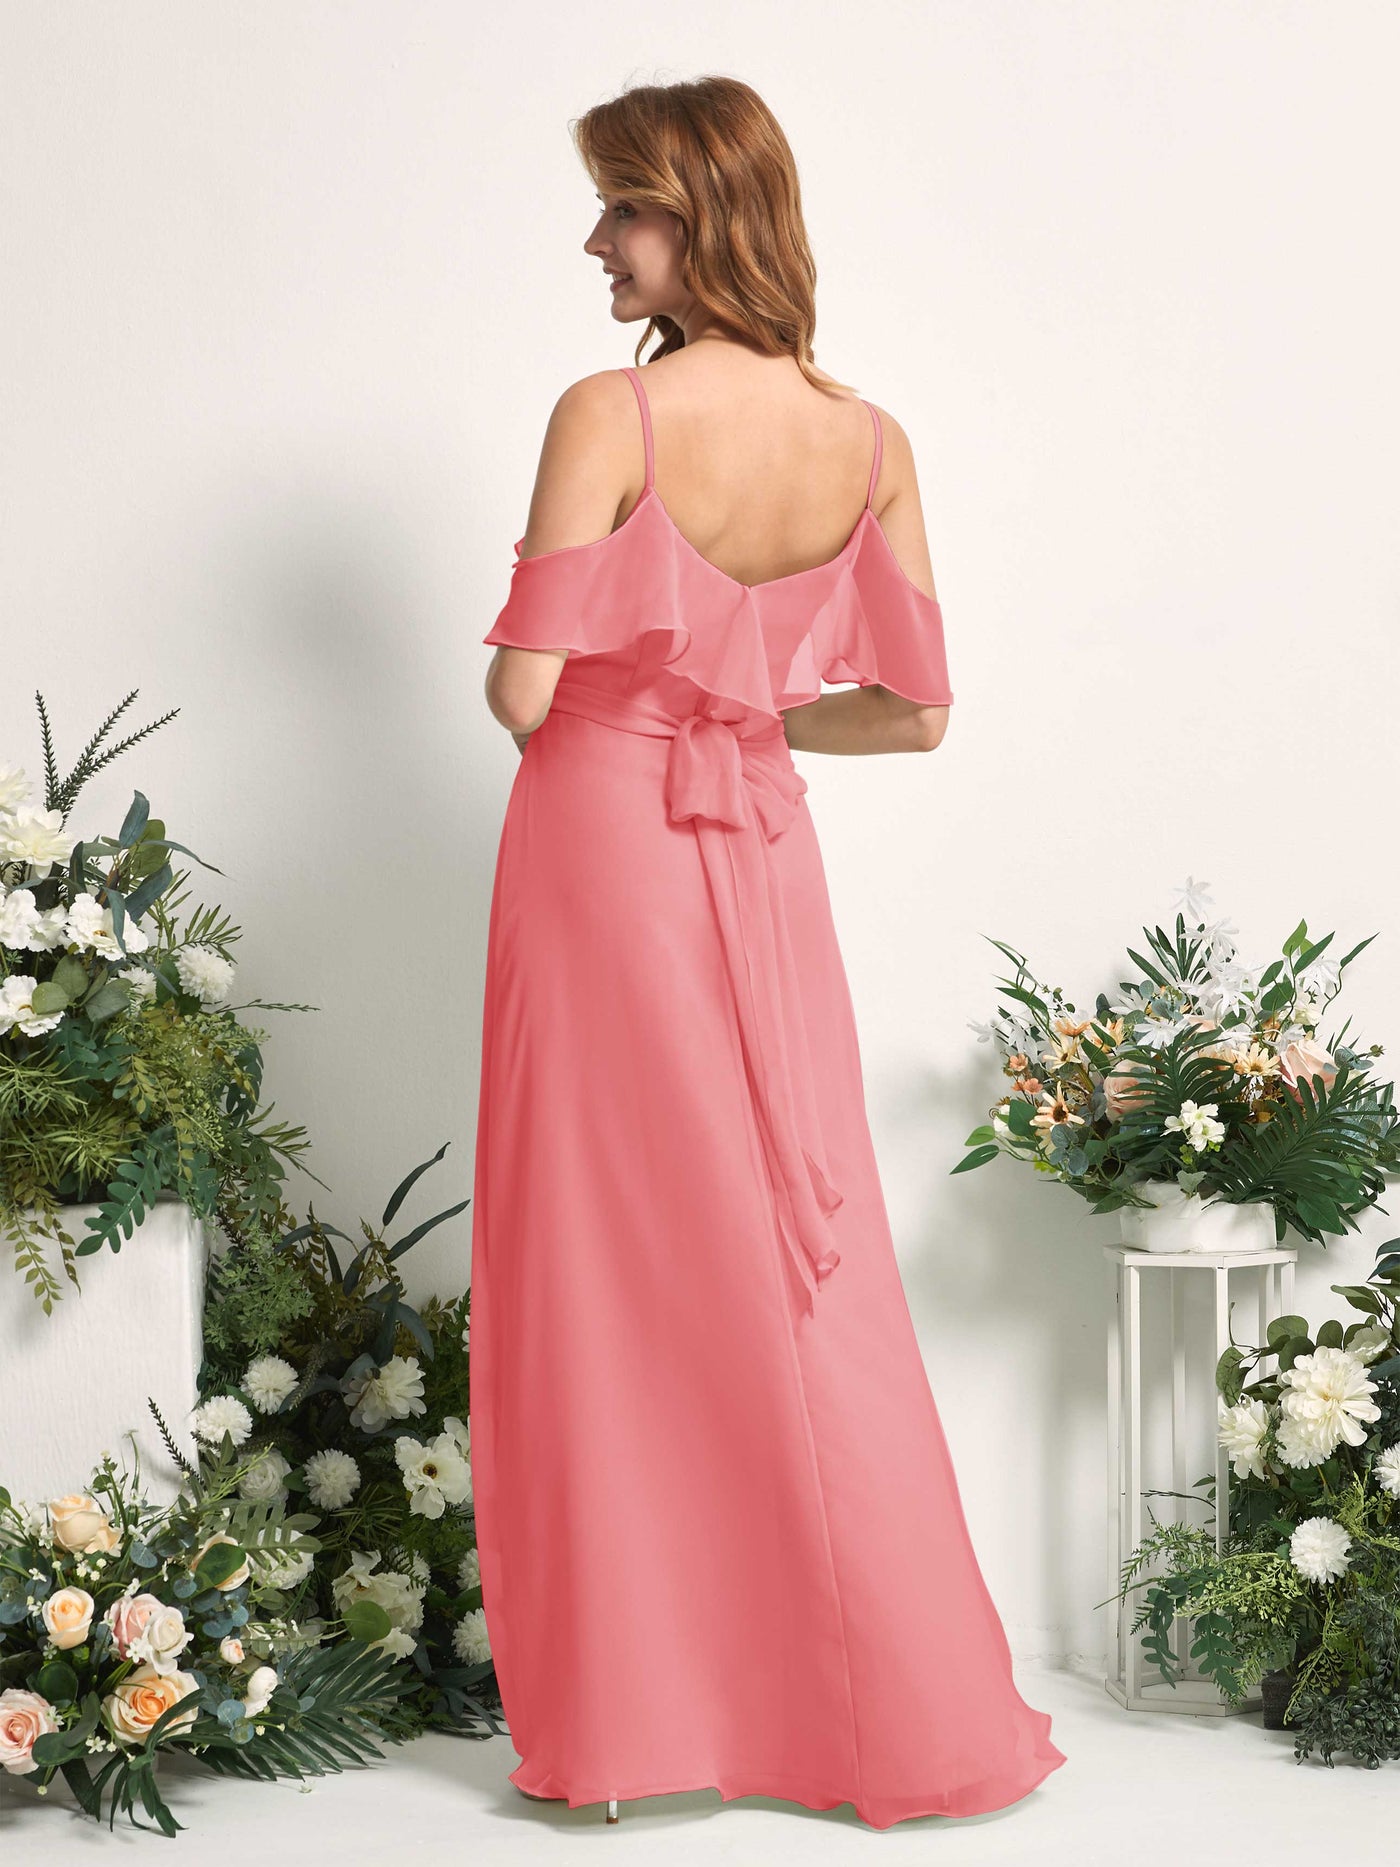 Bridesmaid Dress A-line Chiffon Spaghetti-straps Full Length Sleeveless Wedding Party Dress - Coral Pink (81227430)#color_coral-pink